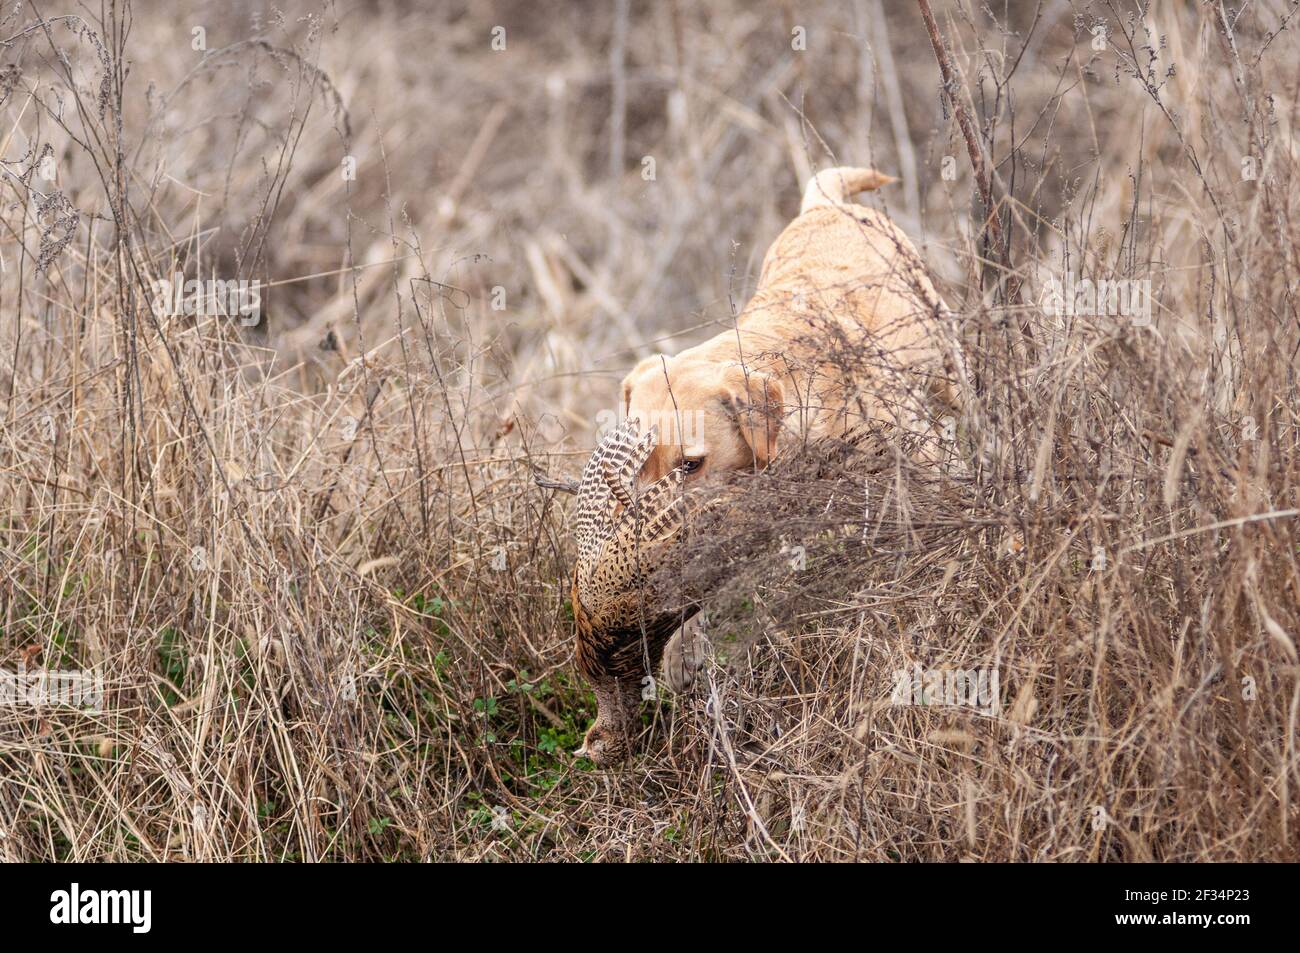 Yellow labrador retriever is retrieving a dead pheasant in the high grass. Winter scenery, dog performing difficukt retrieve Stock Photo